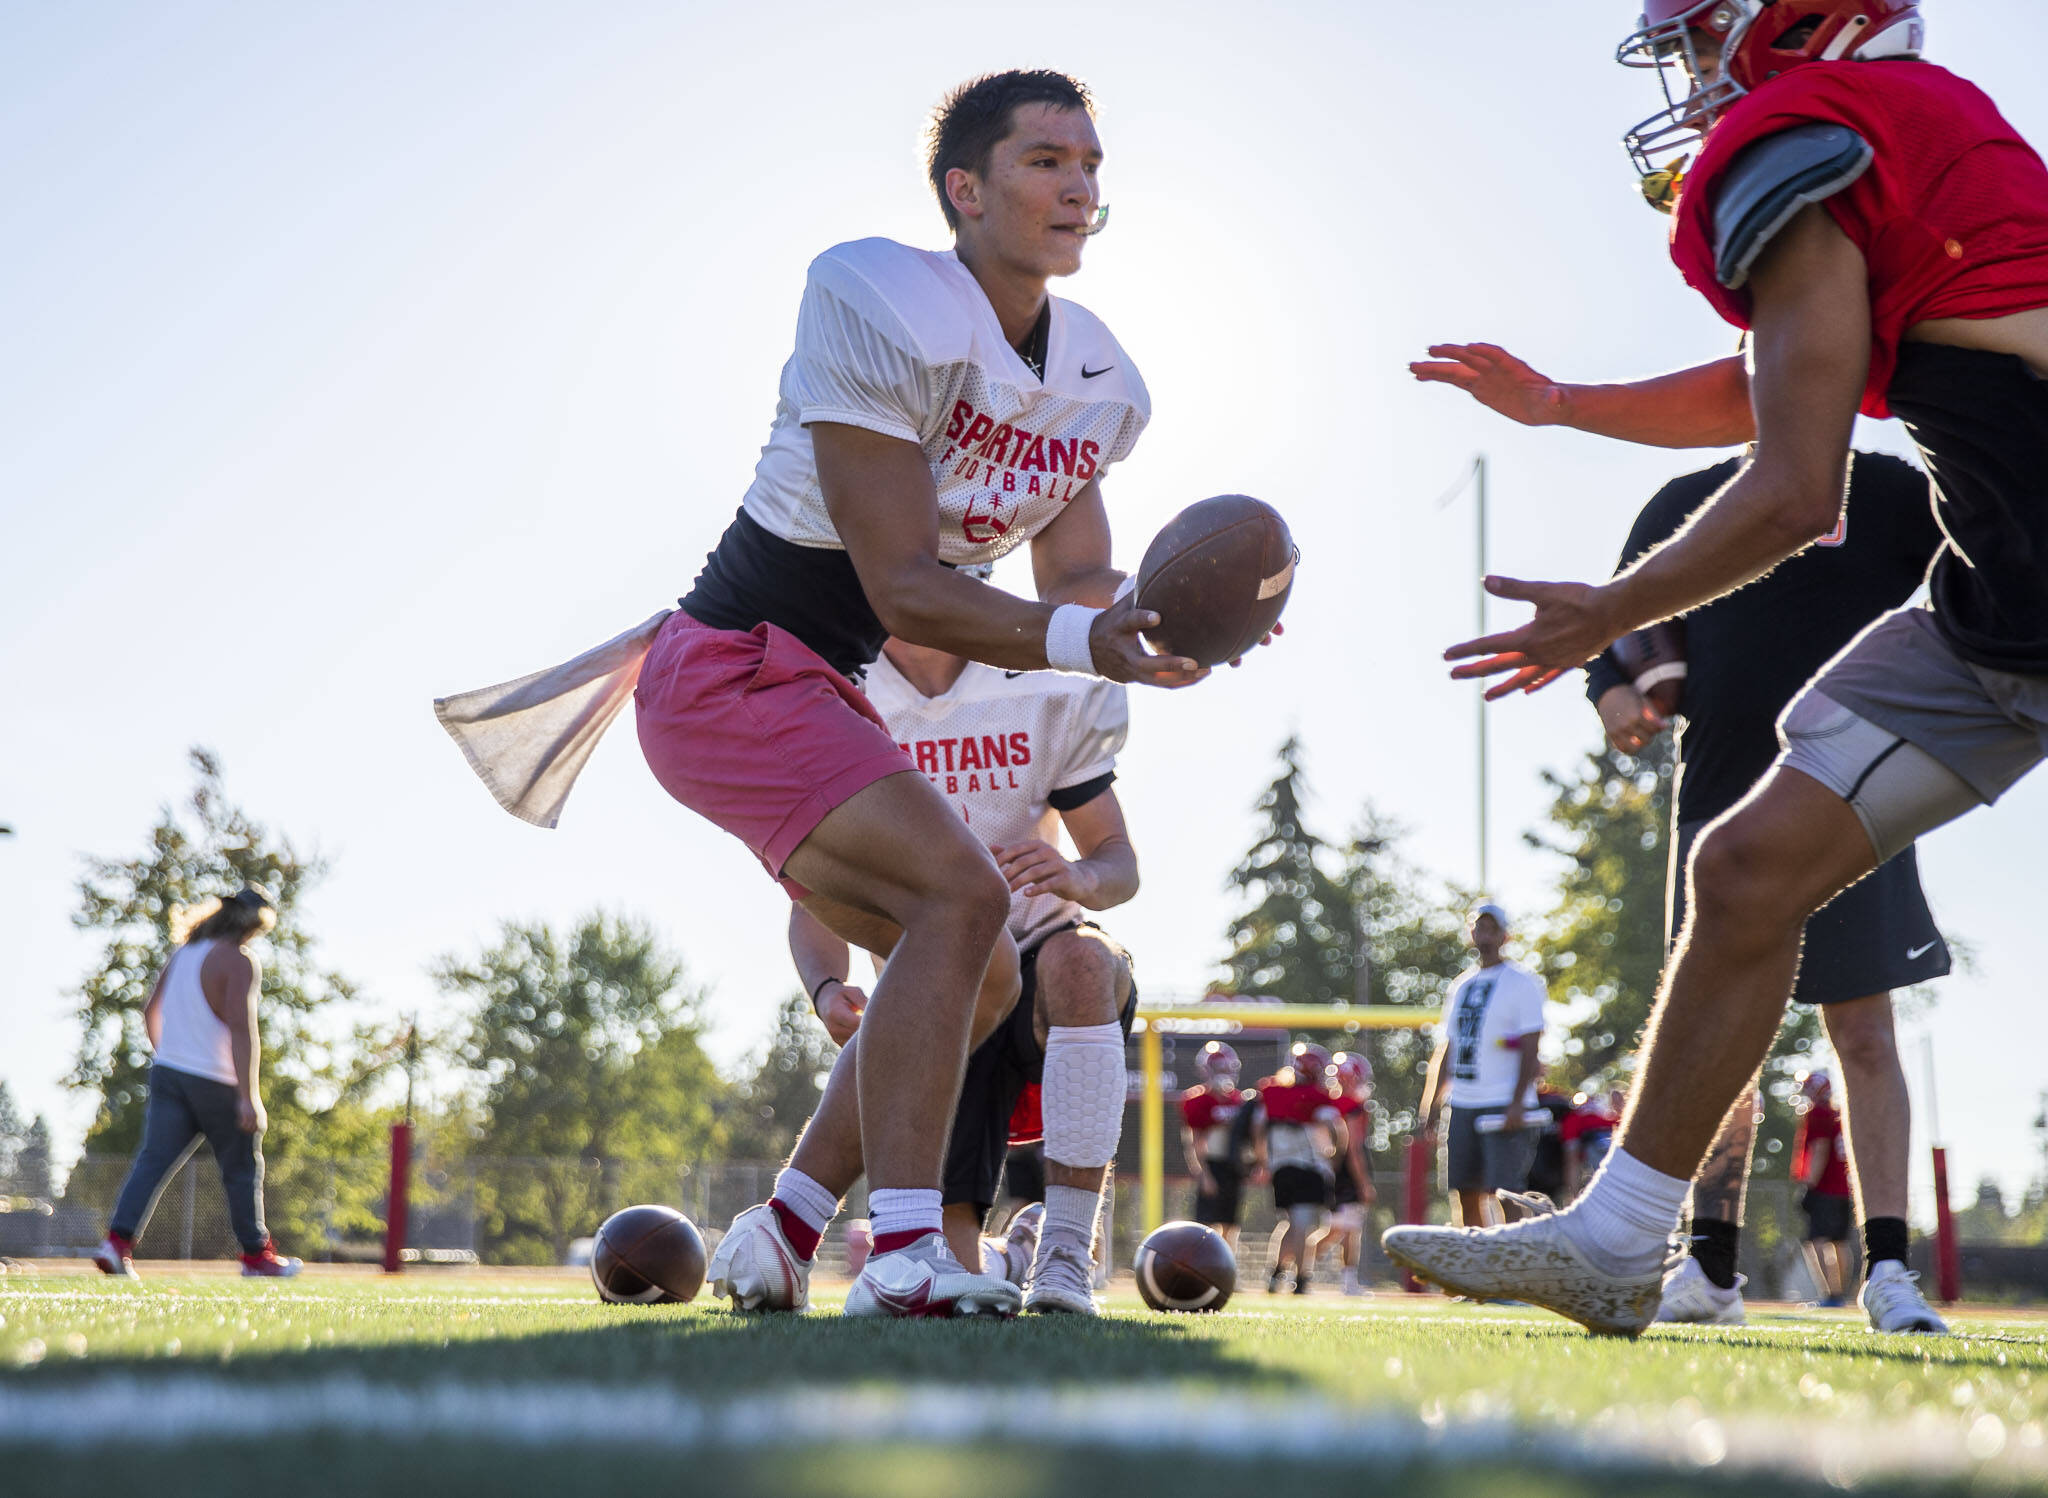 Stanwood’s Wyatt Custer works on handoffs during practice Monday, Aug. 29, 2022 in Stanwood. (Olivia Vanni / The Herald)